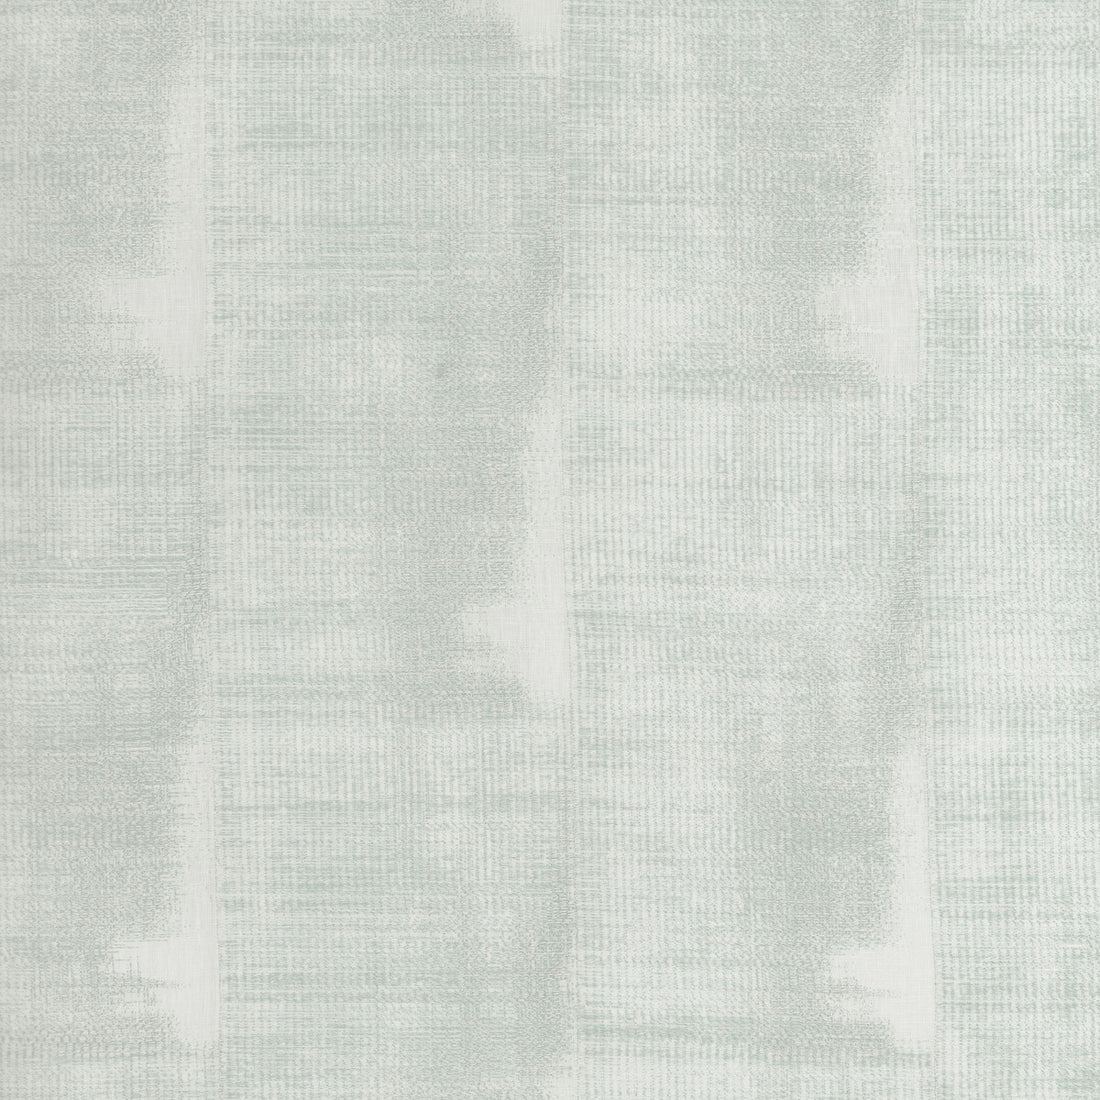 Etched fabric in spritz color - pattern 36395.130.0 - by Kravet Couture in the Barbara Barry Ojai collection